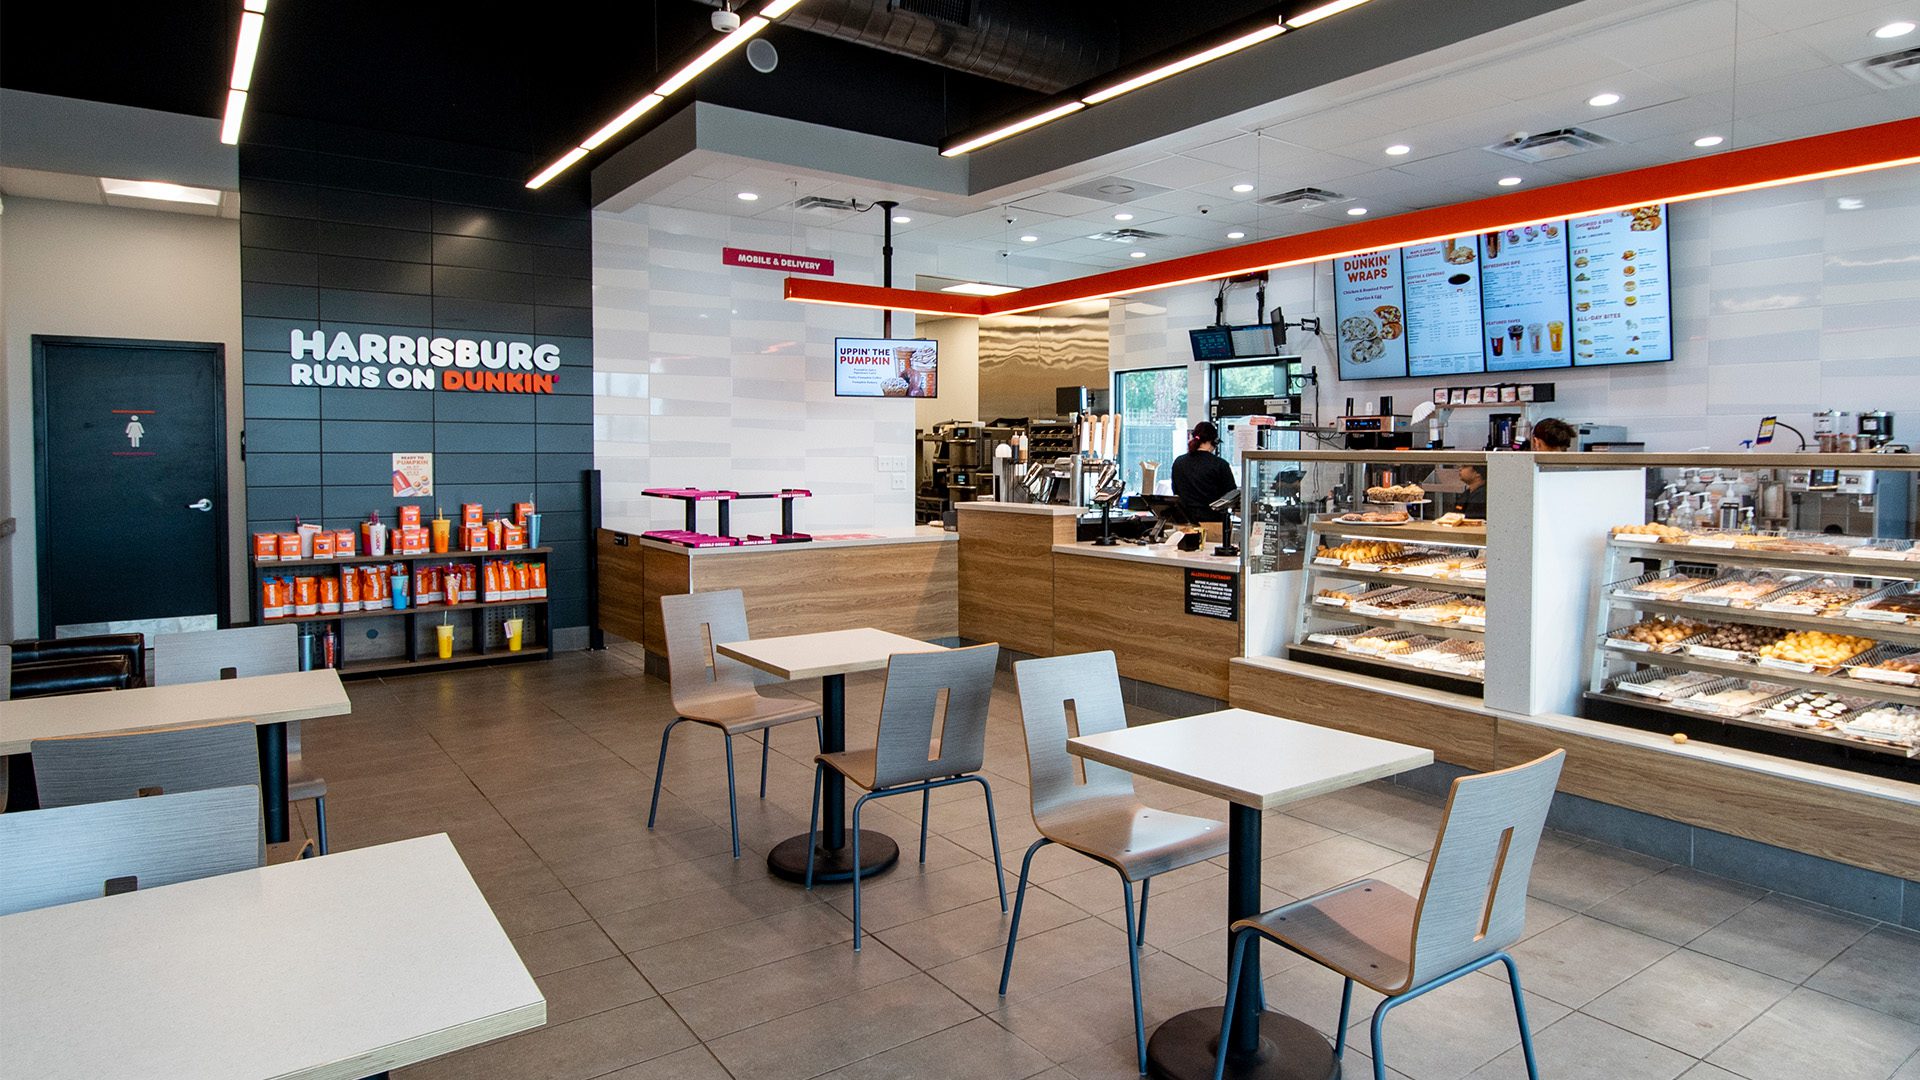 Dunkin' at Farmington interior with clean white walls and seating